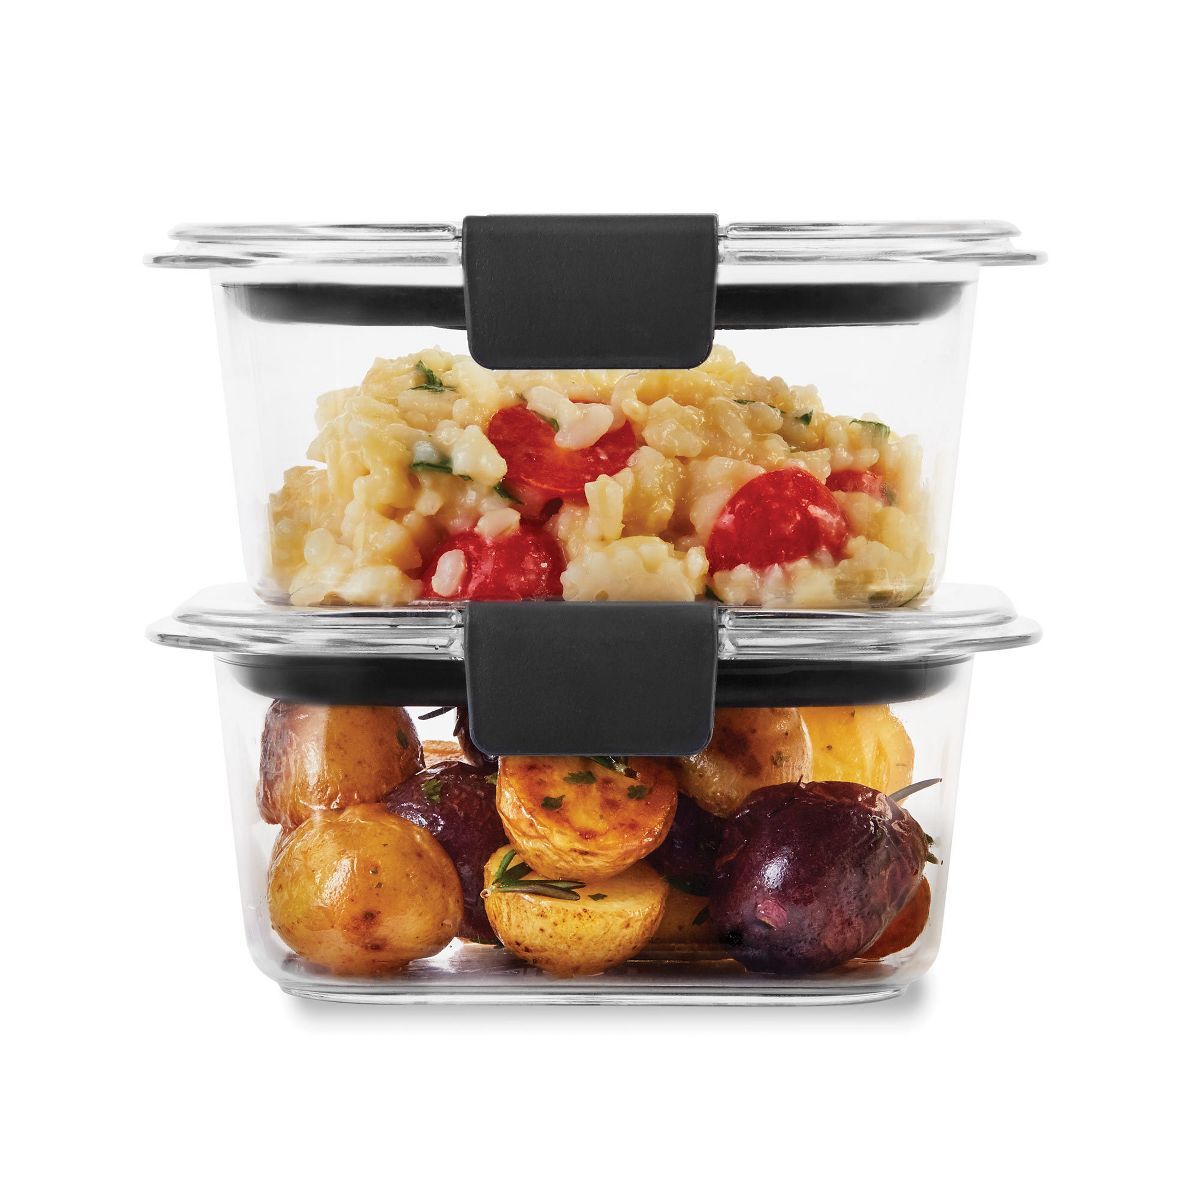 Rubbermaid 1.3 cup 2pk Brillance Food Storage Container | Target